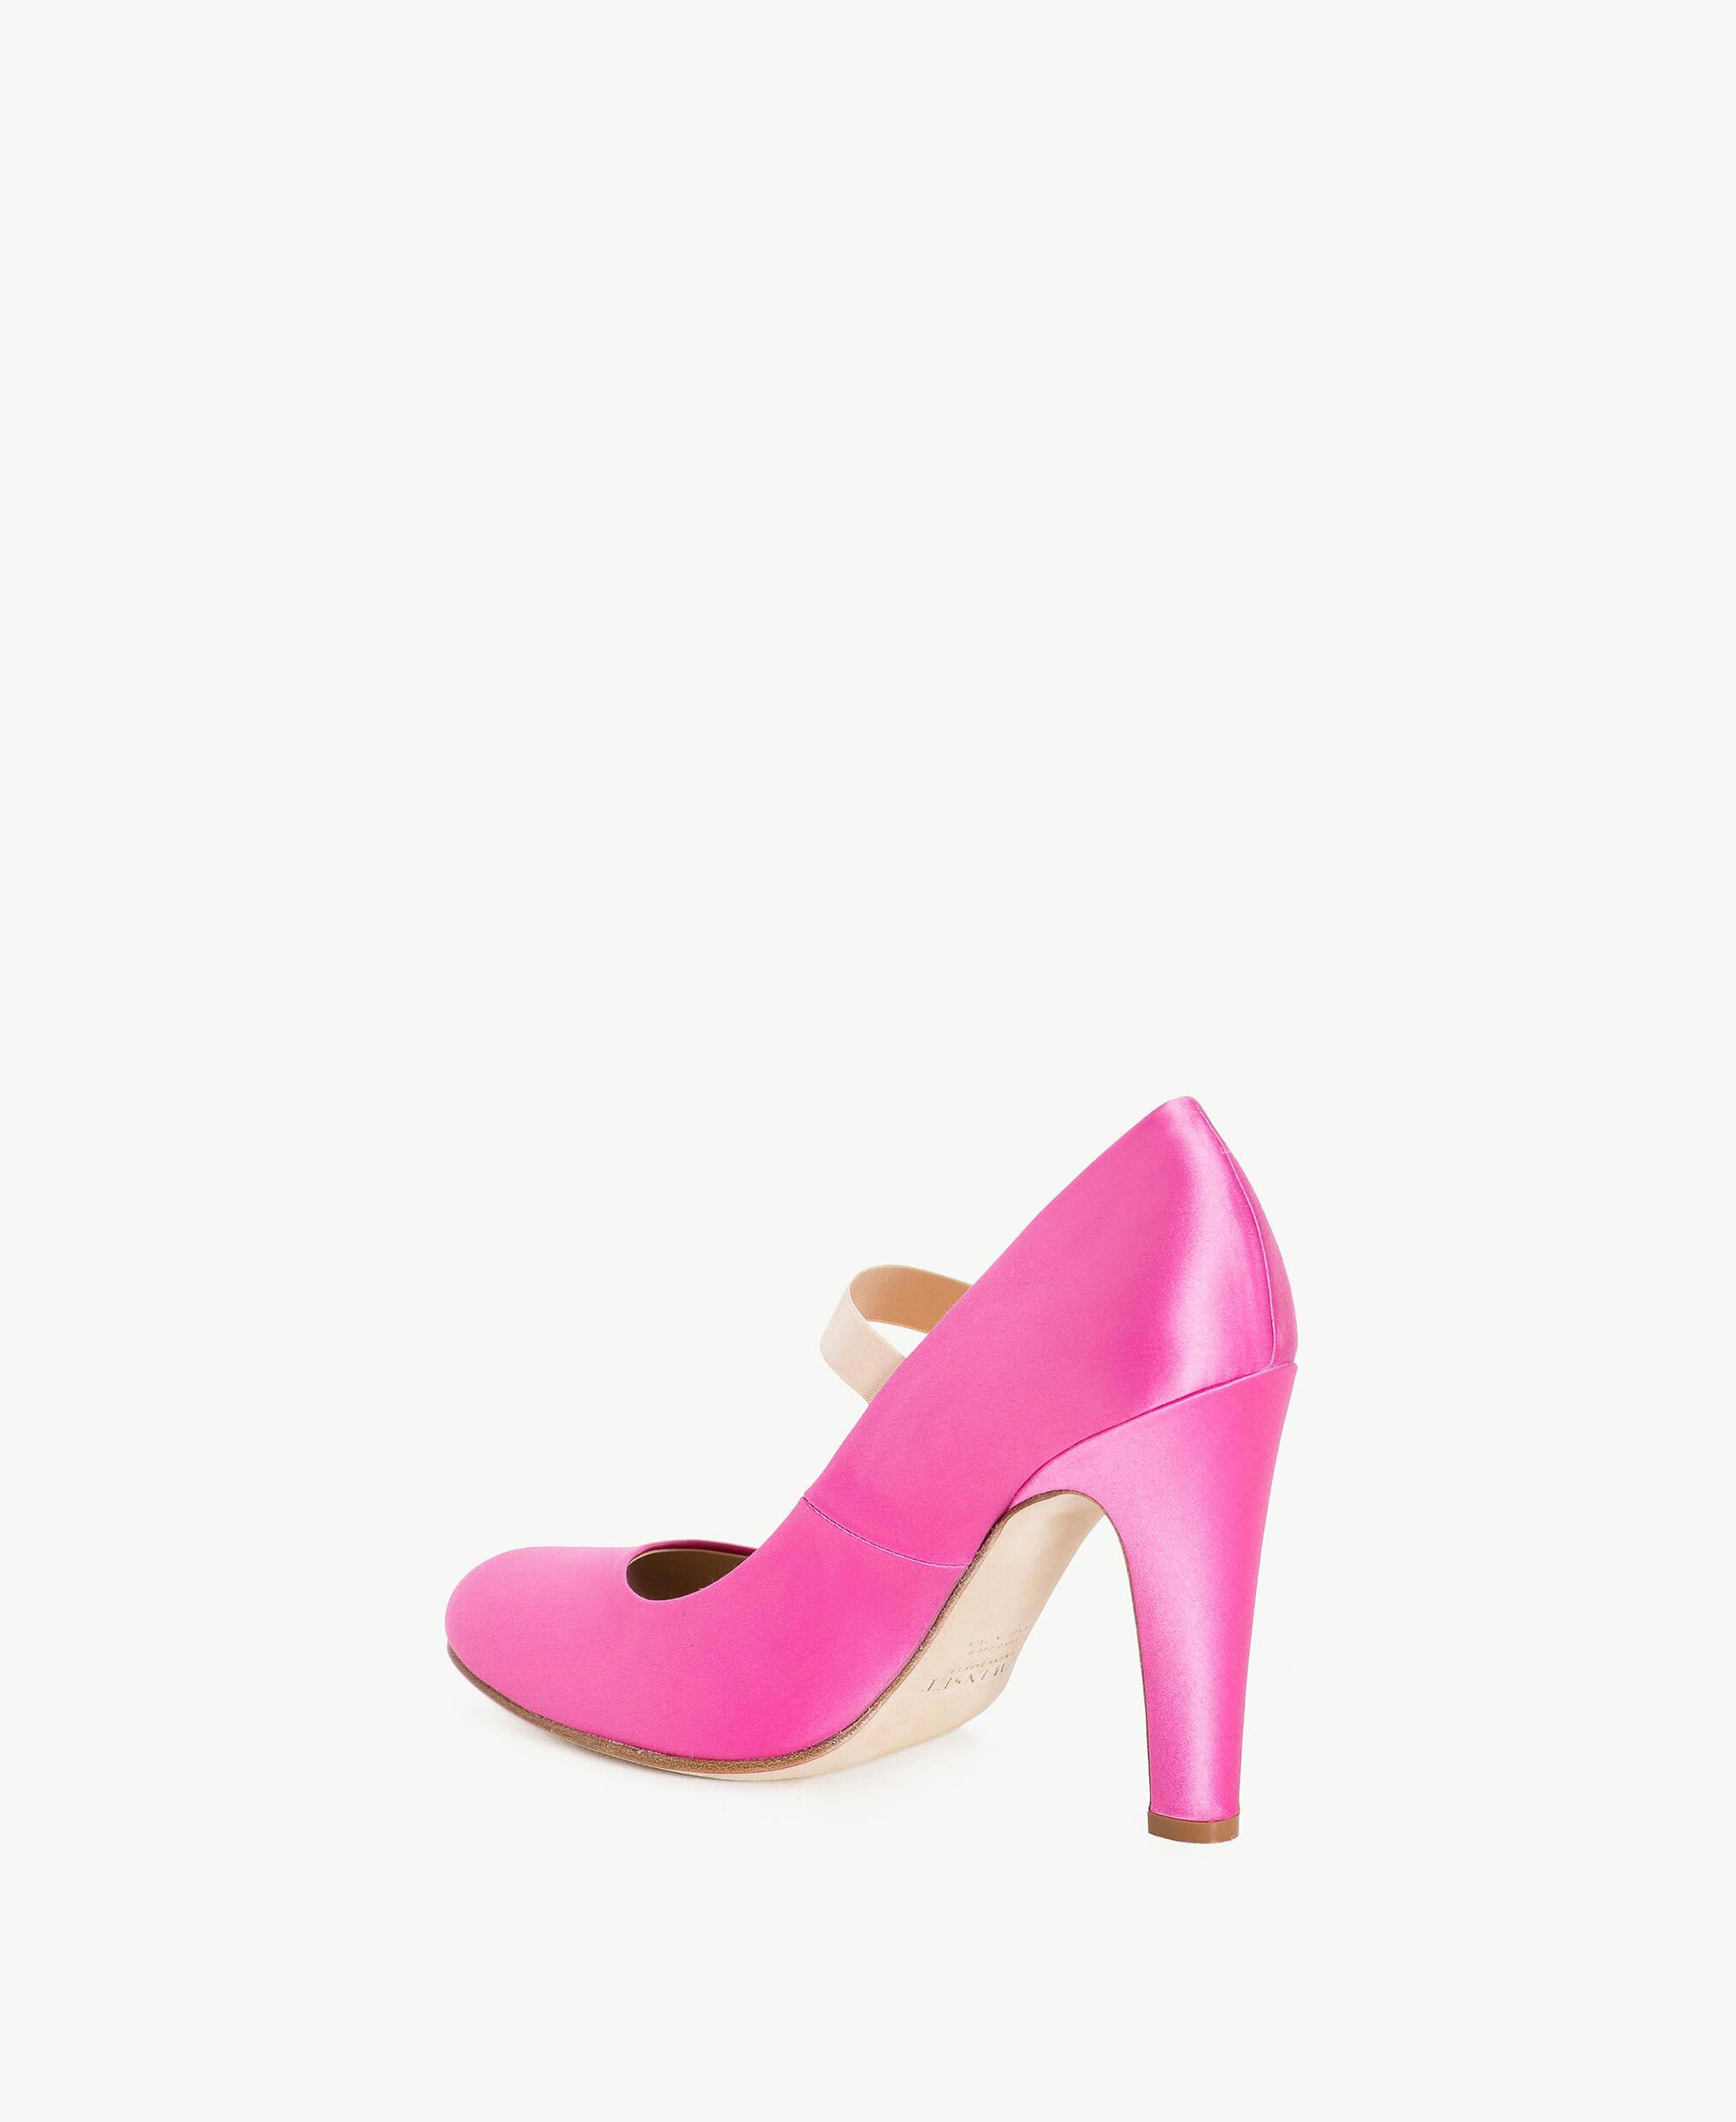 pink satin court shoes